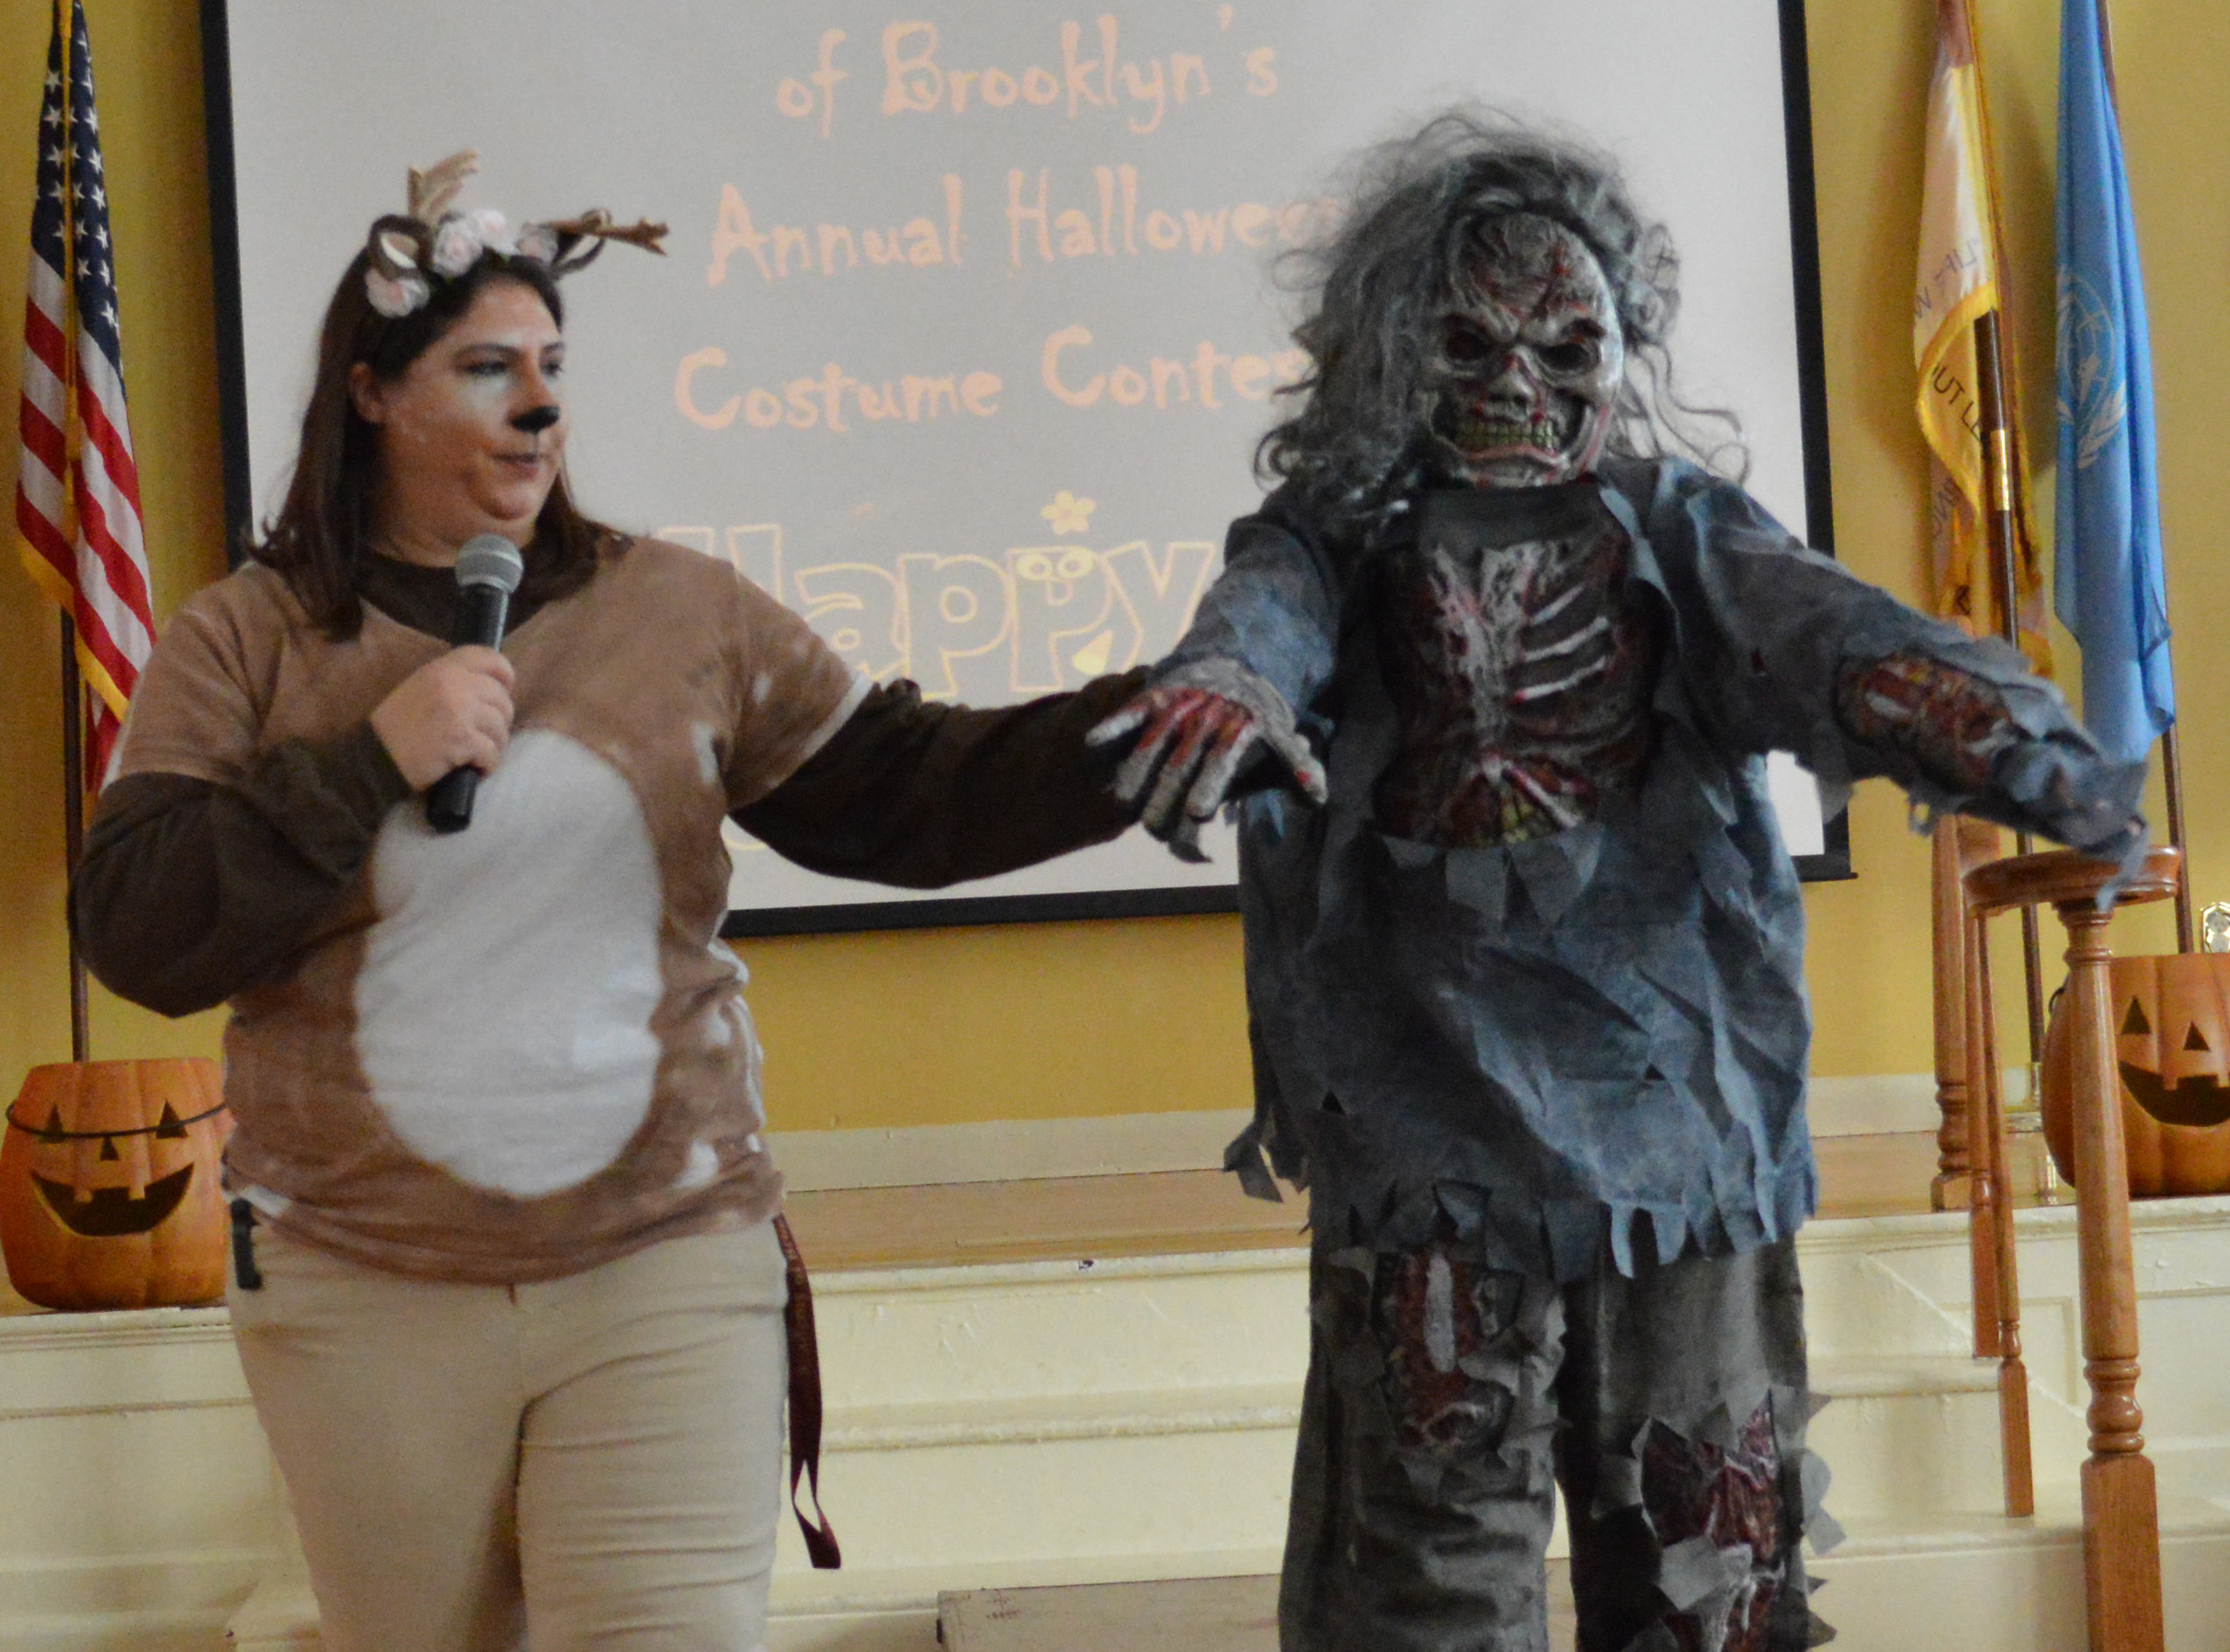 Lower Schooler Jake won first prize for his scary zombie costume!